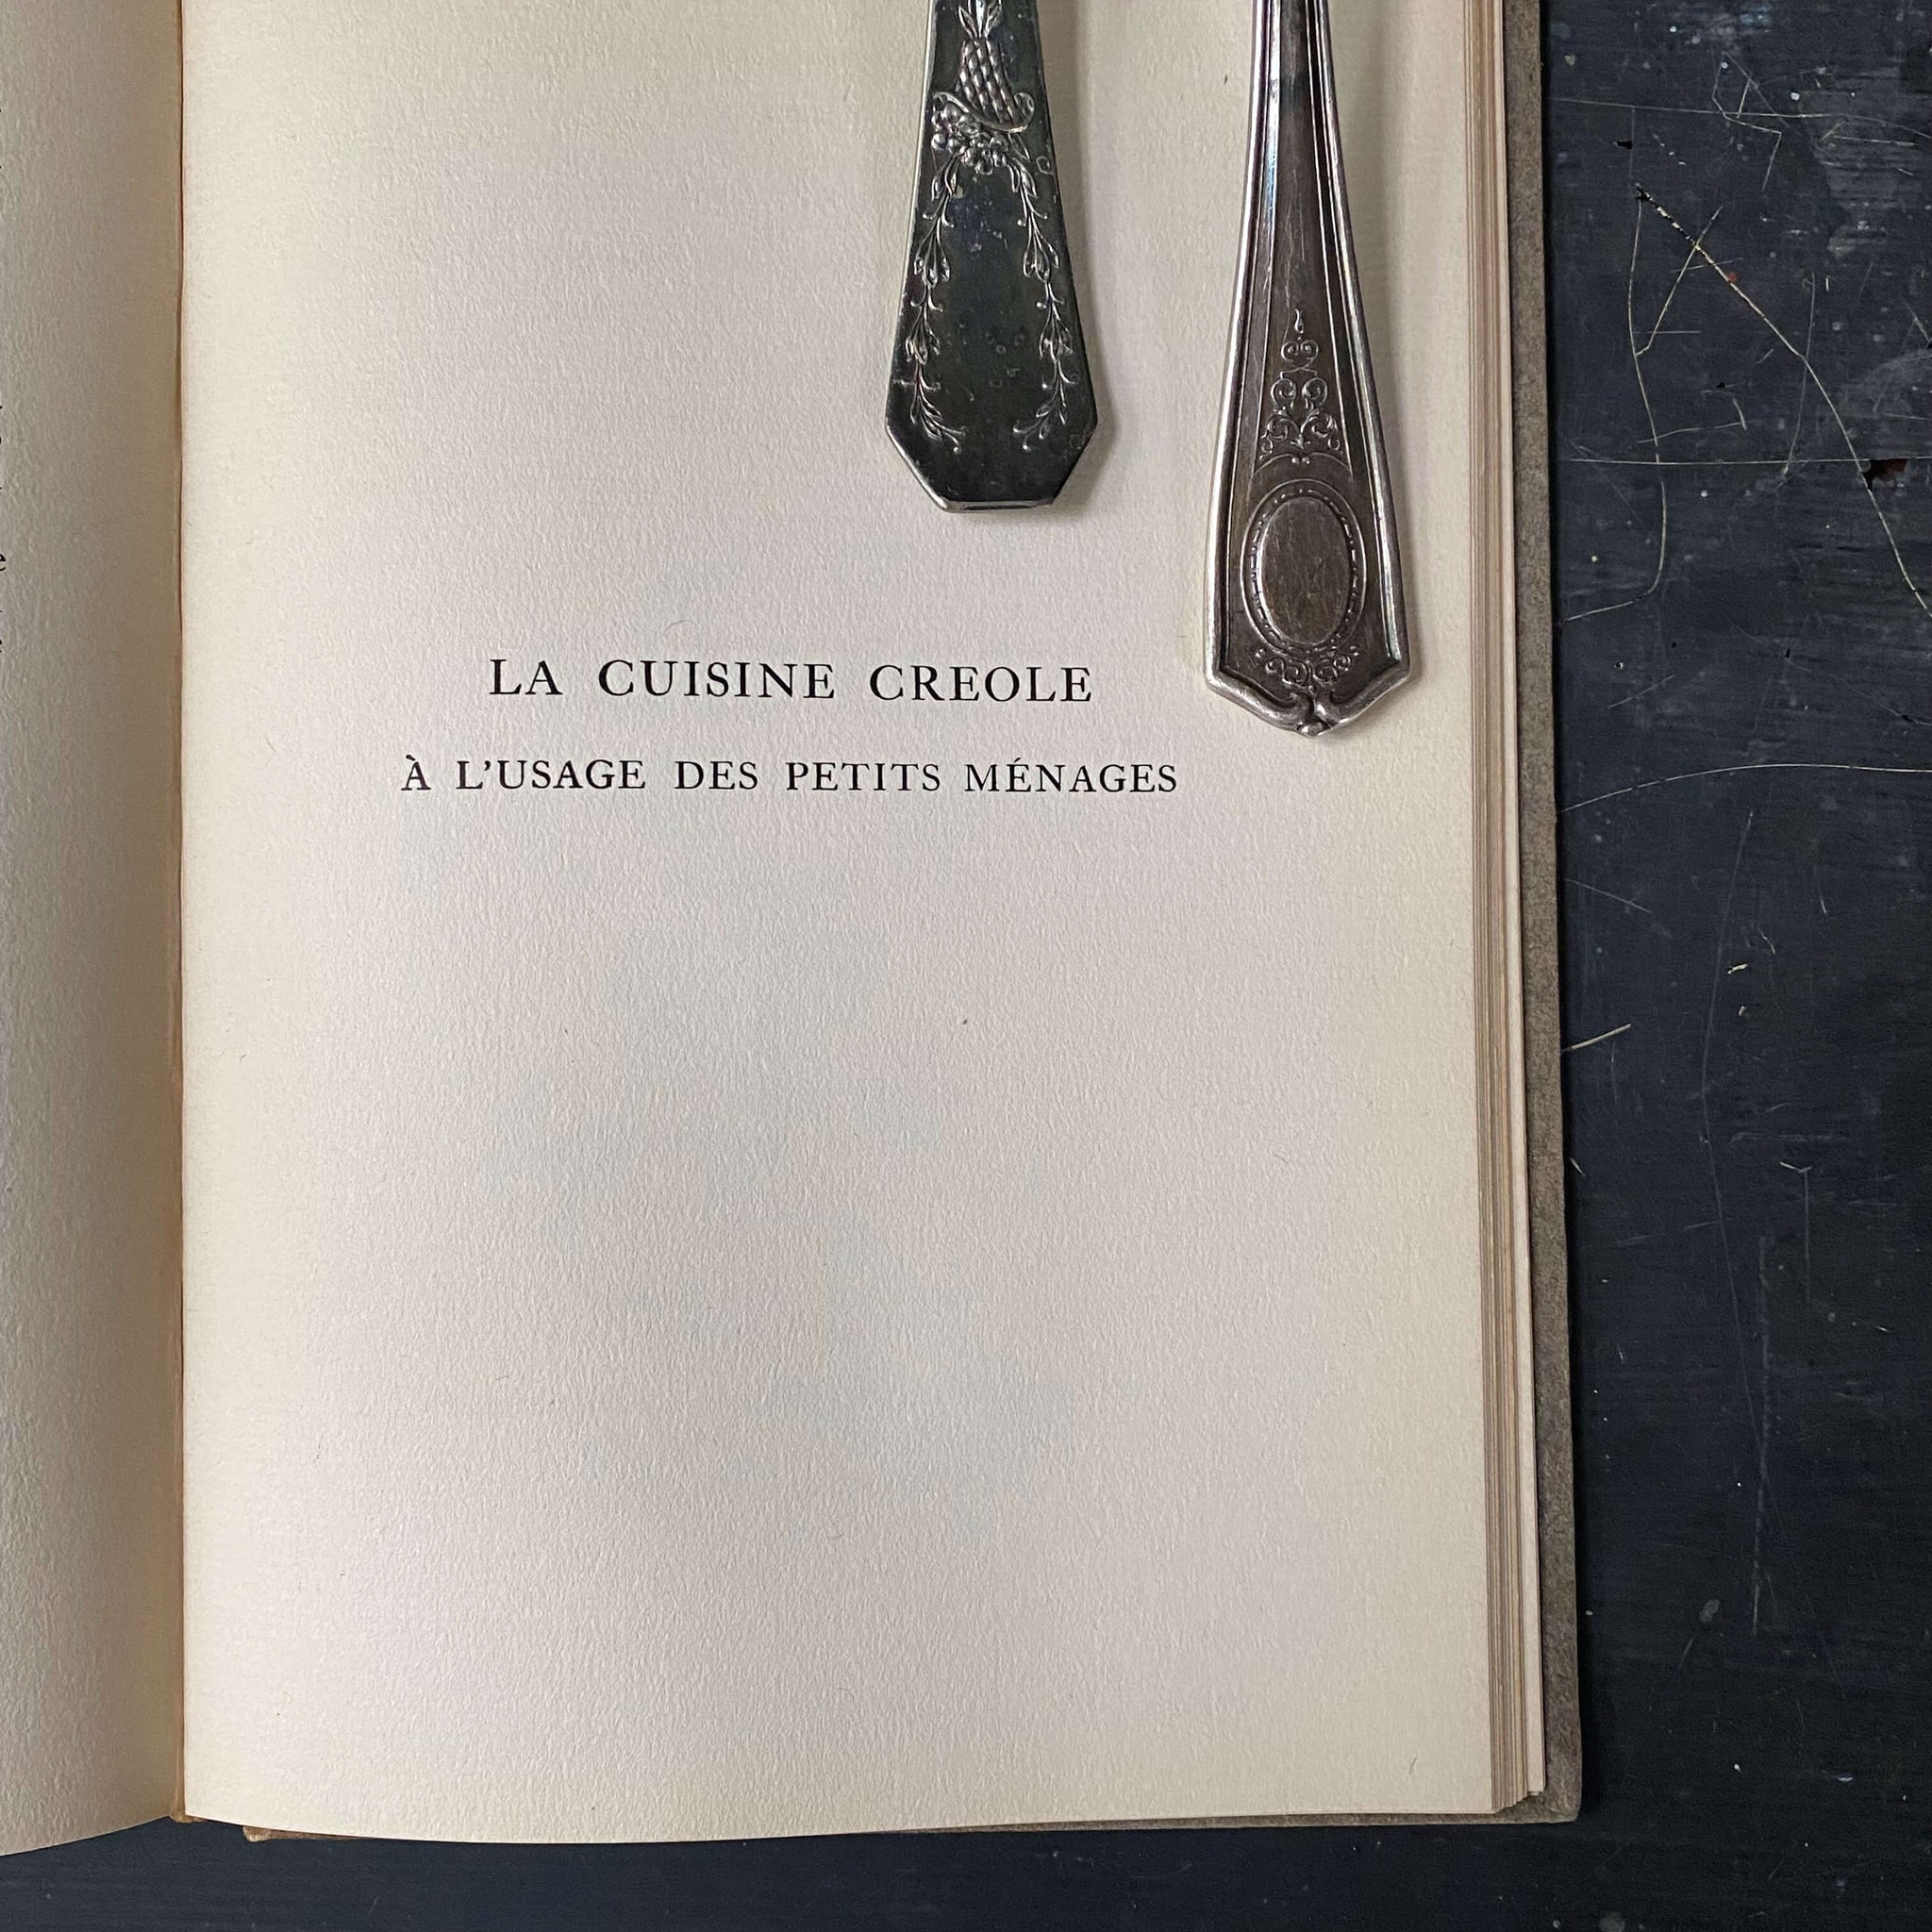 Cooking in Old Creole Days by Celestine Eustis circa 1903 - Rare First Edition Antique Cookbook - RESERVED FOR JOLIE B.